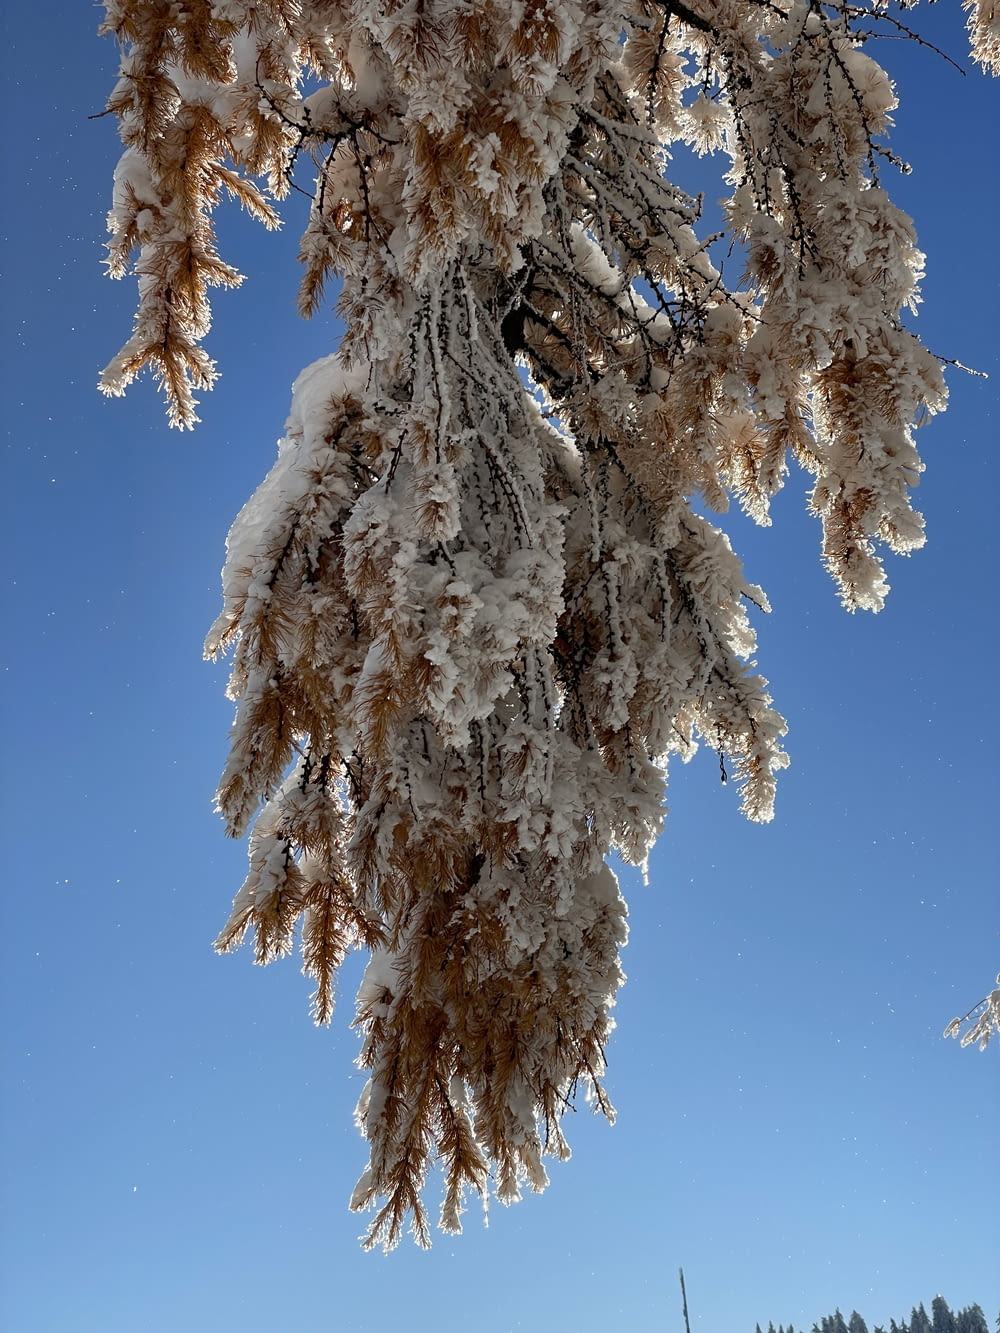 snow covered branches of a tree against a blue sky